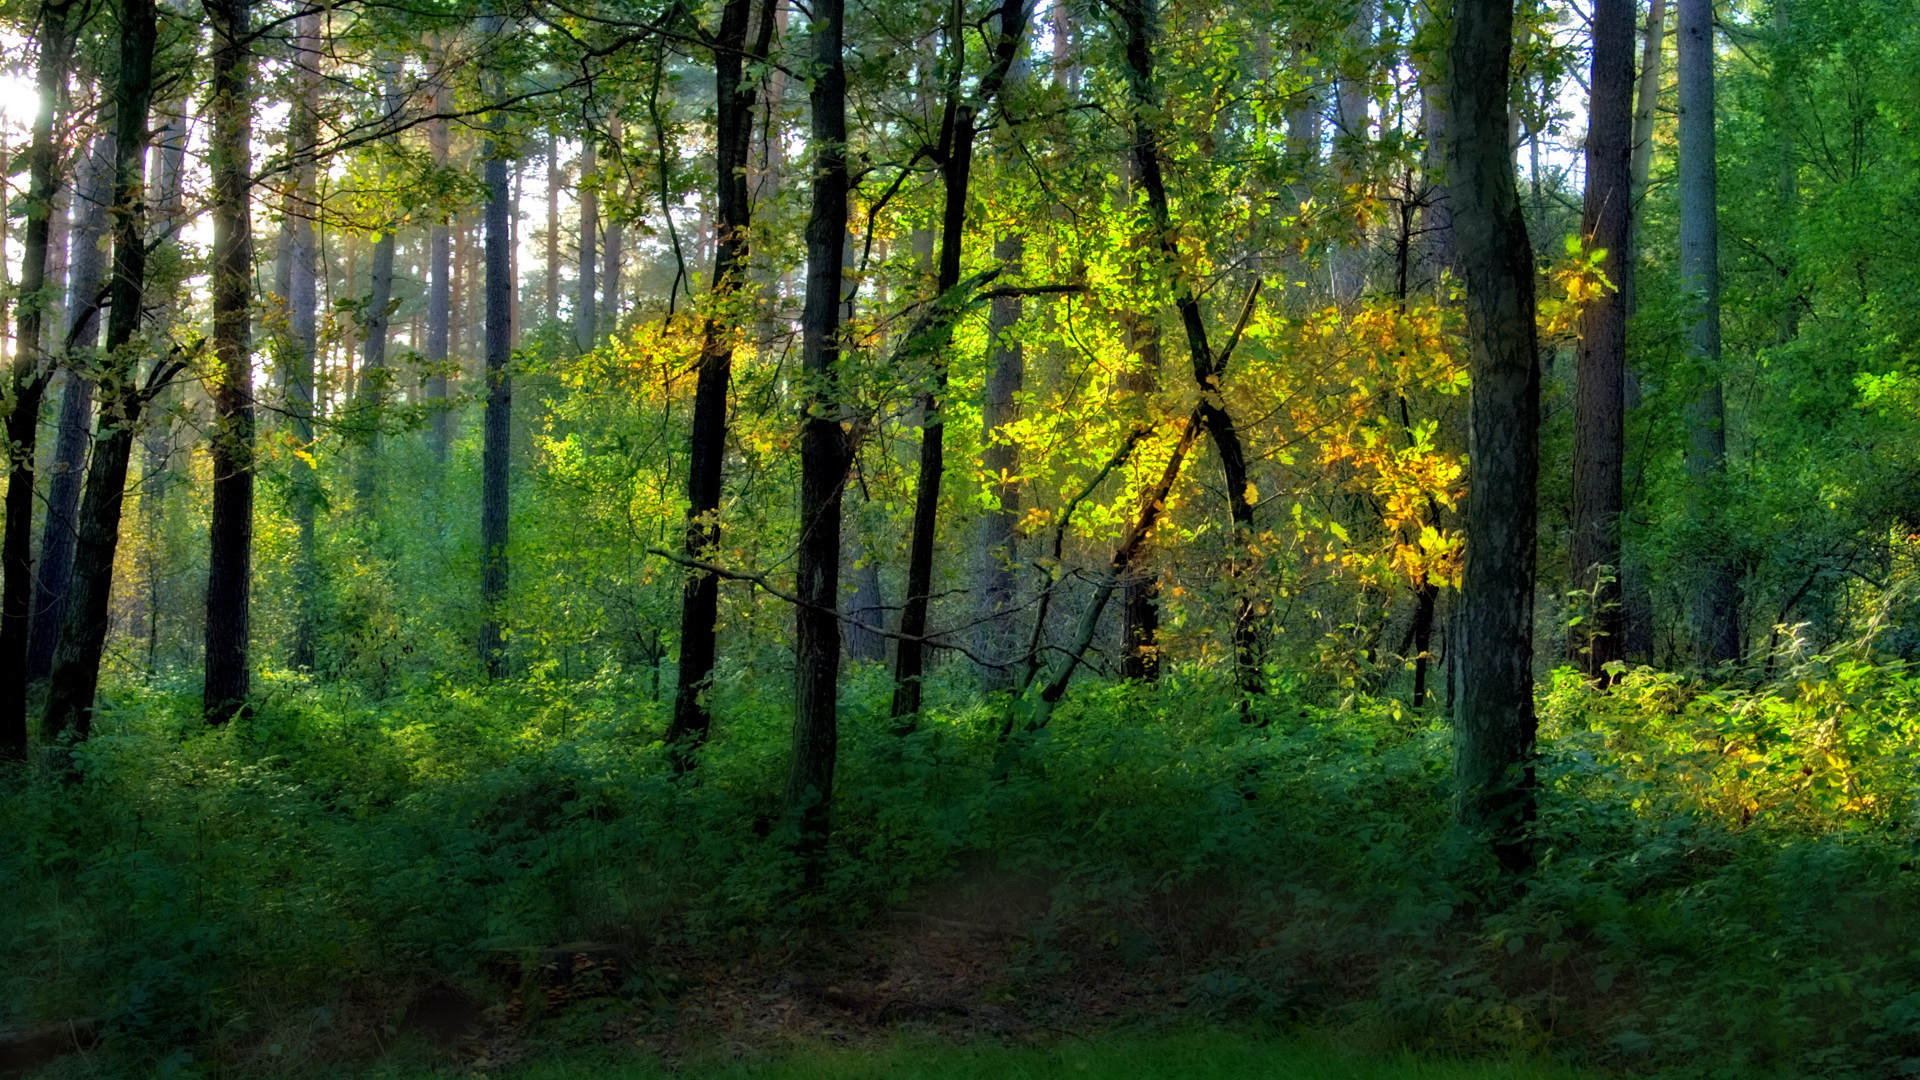 nature scenes - All Tall and Green Trees, Sunlight is Among, Hopeful and Prosperous Scene 1920X1080 free wallpaper download